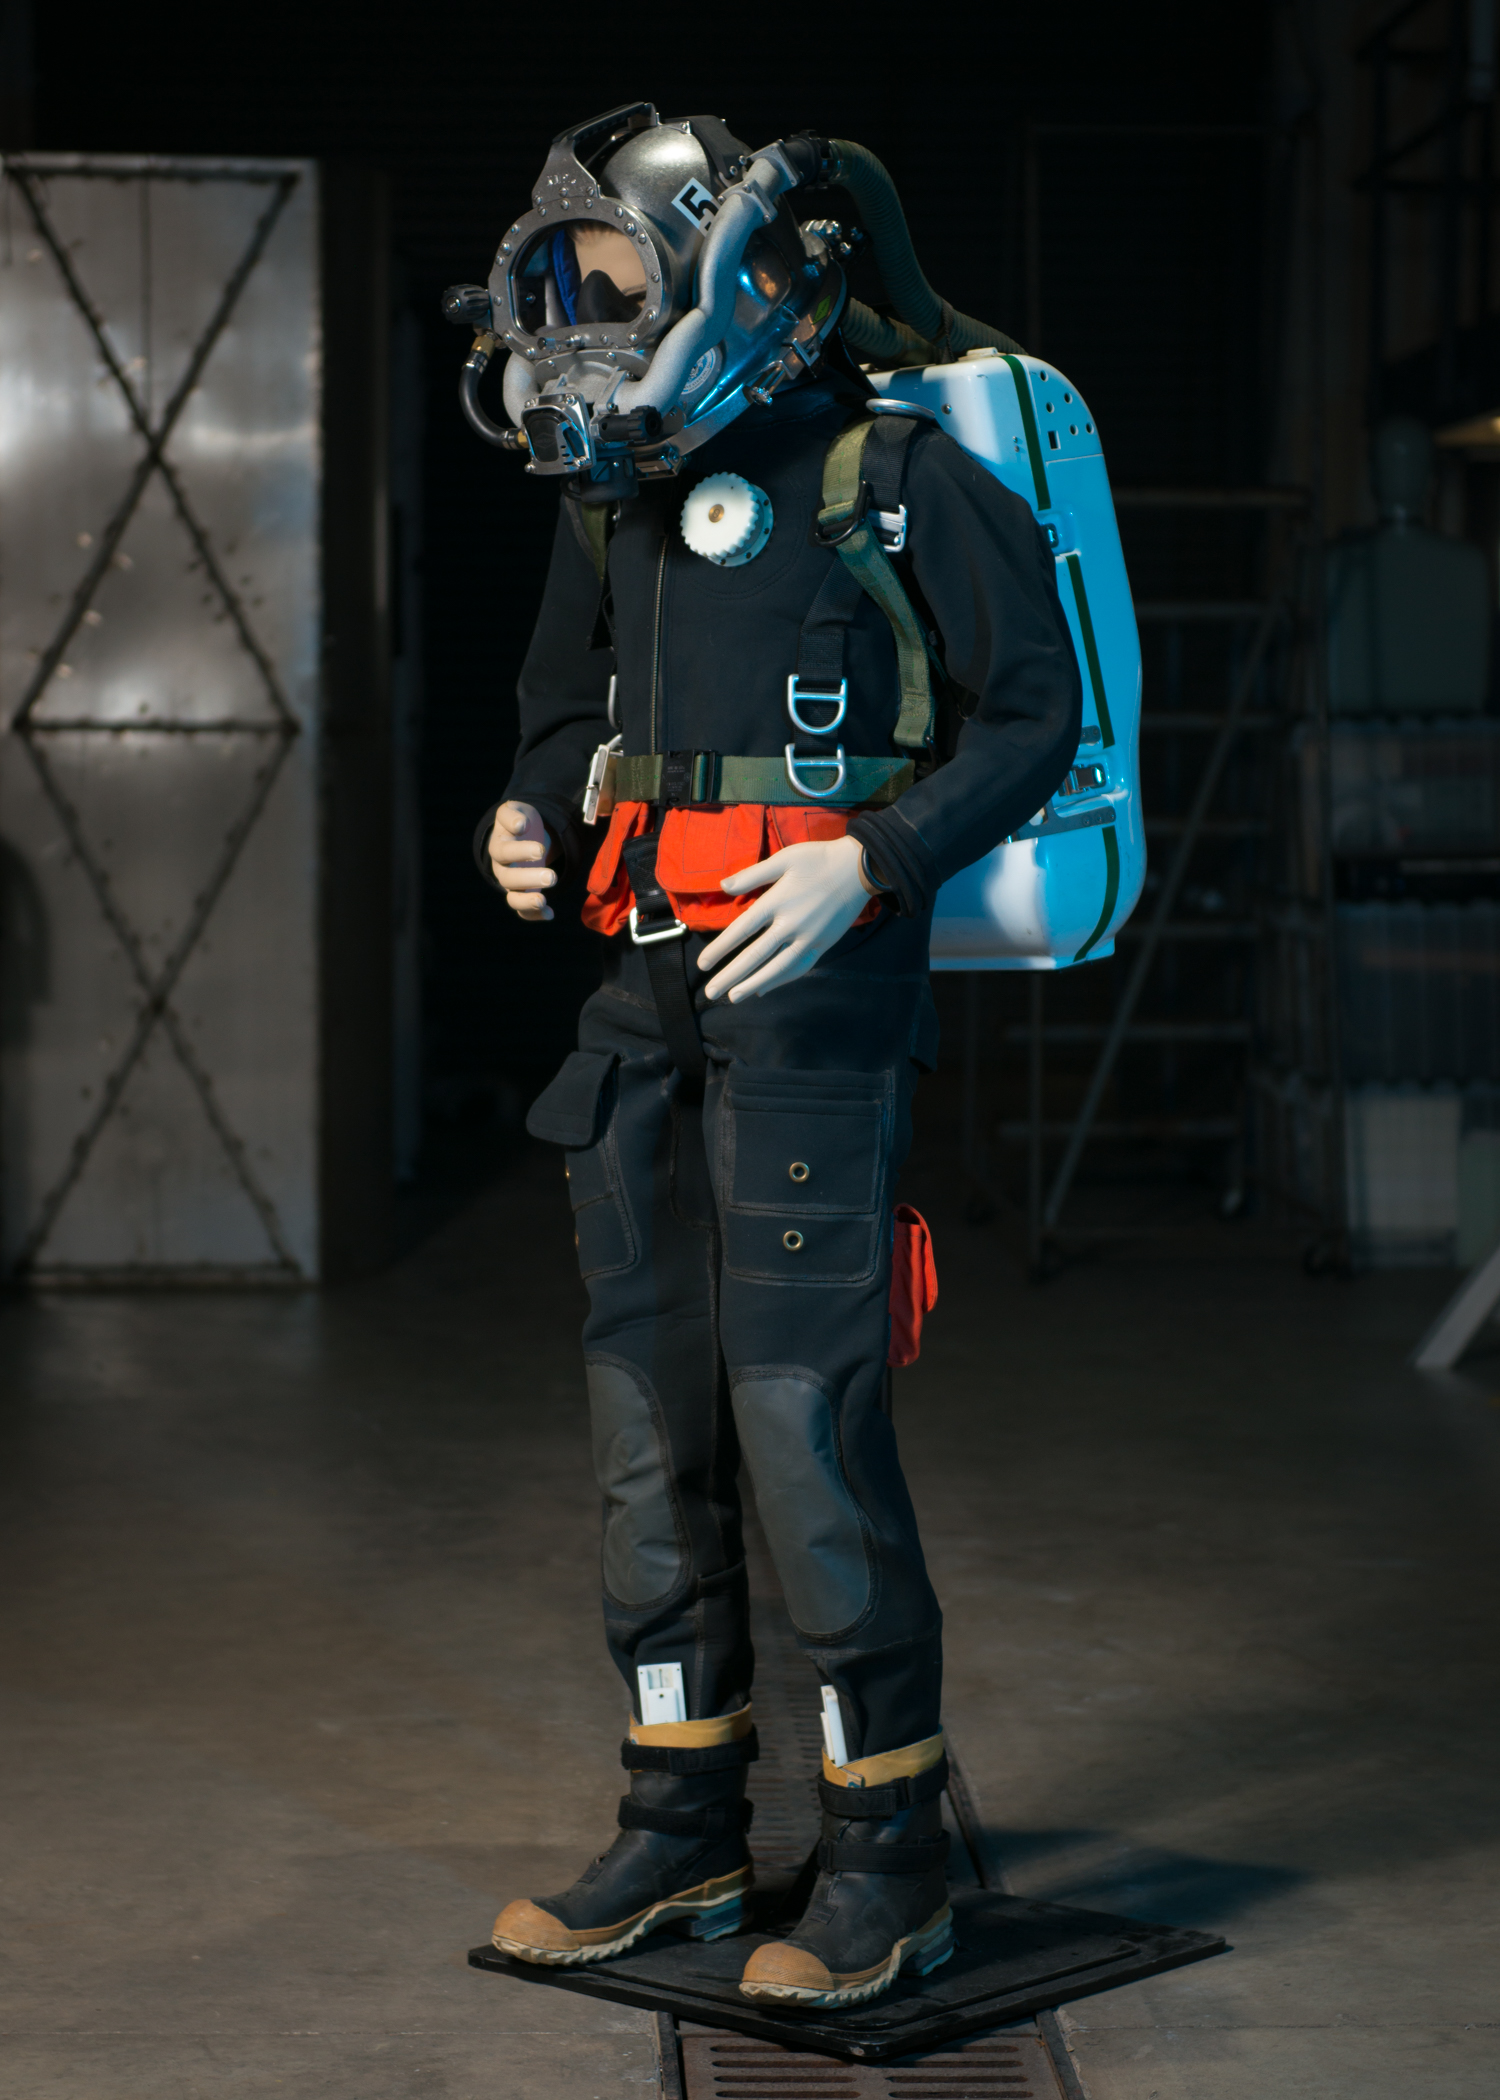 The US Navy’s New Diving Suit Is Straight Out Of G.I. Joe